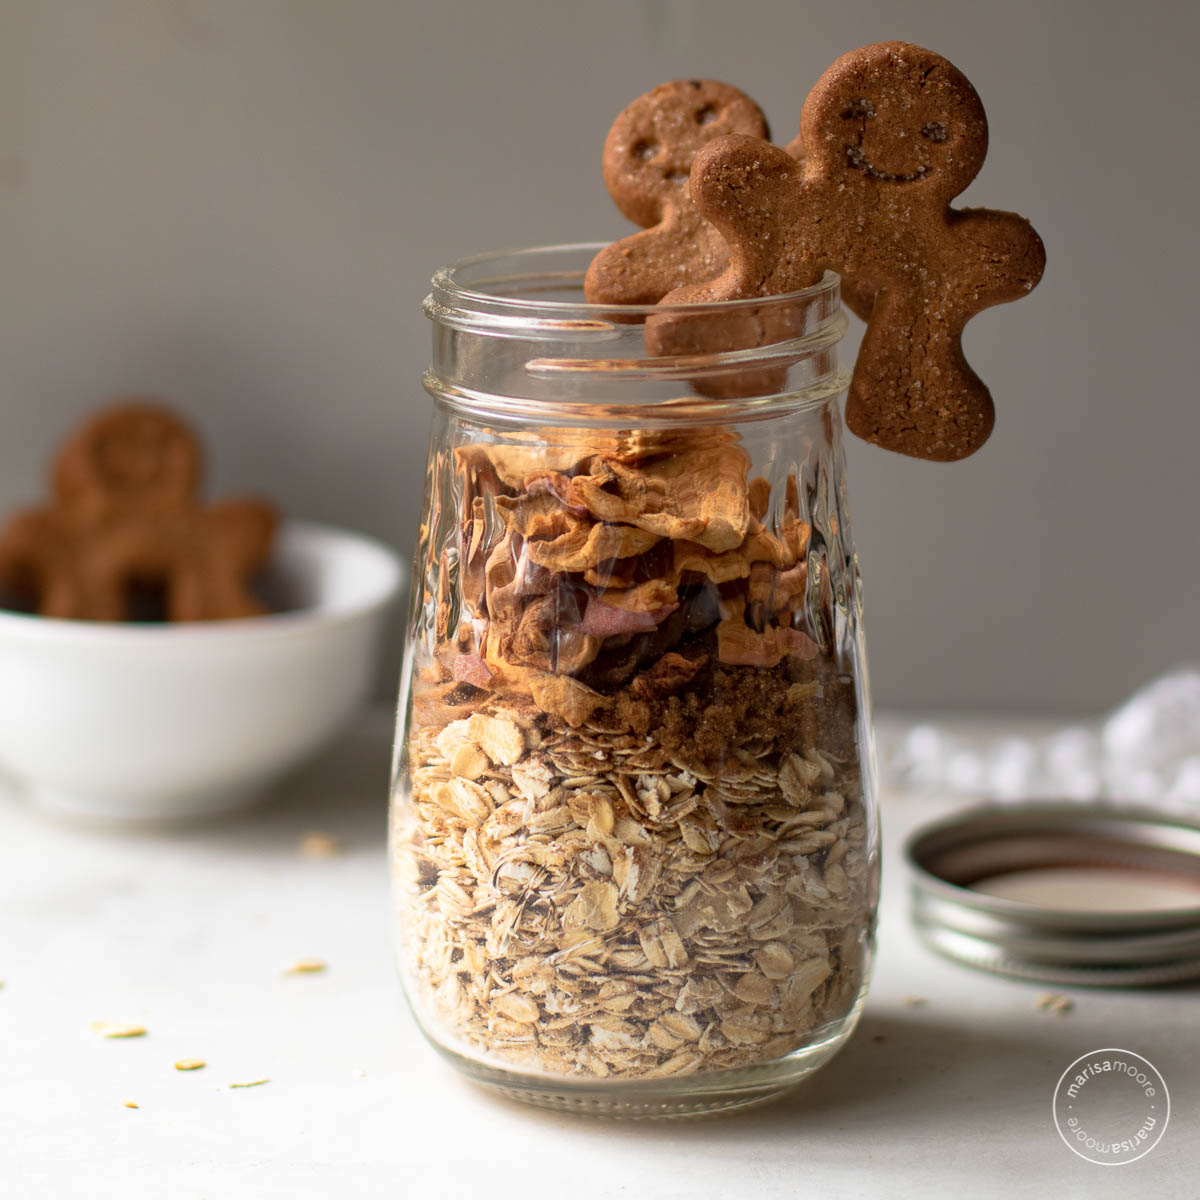 Overnight oats in a jar with two gingerbread cookies on top